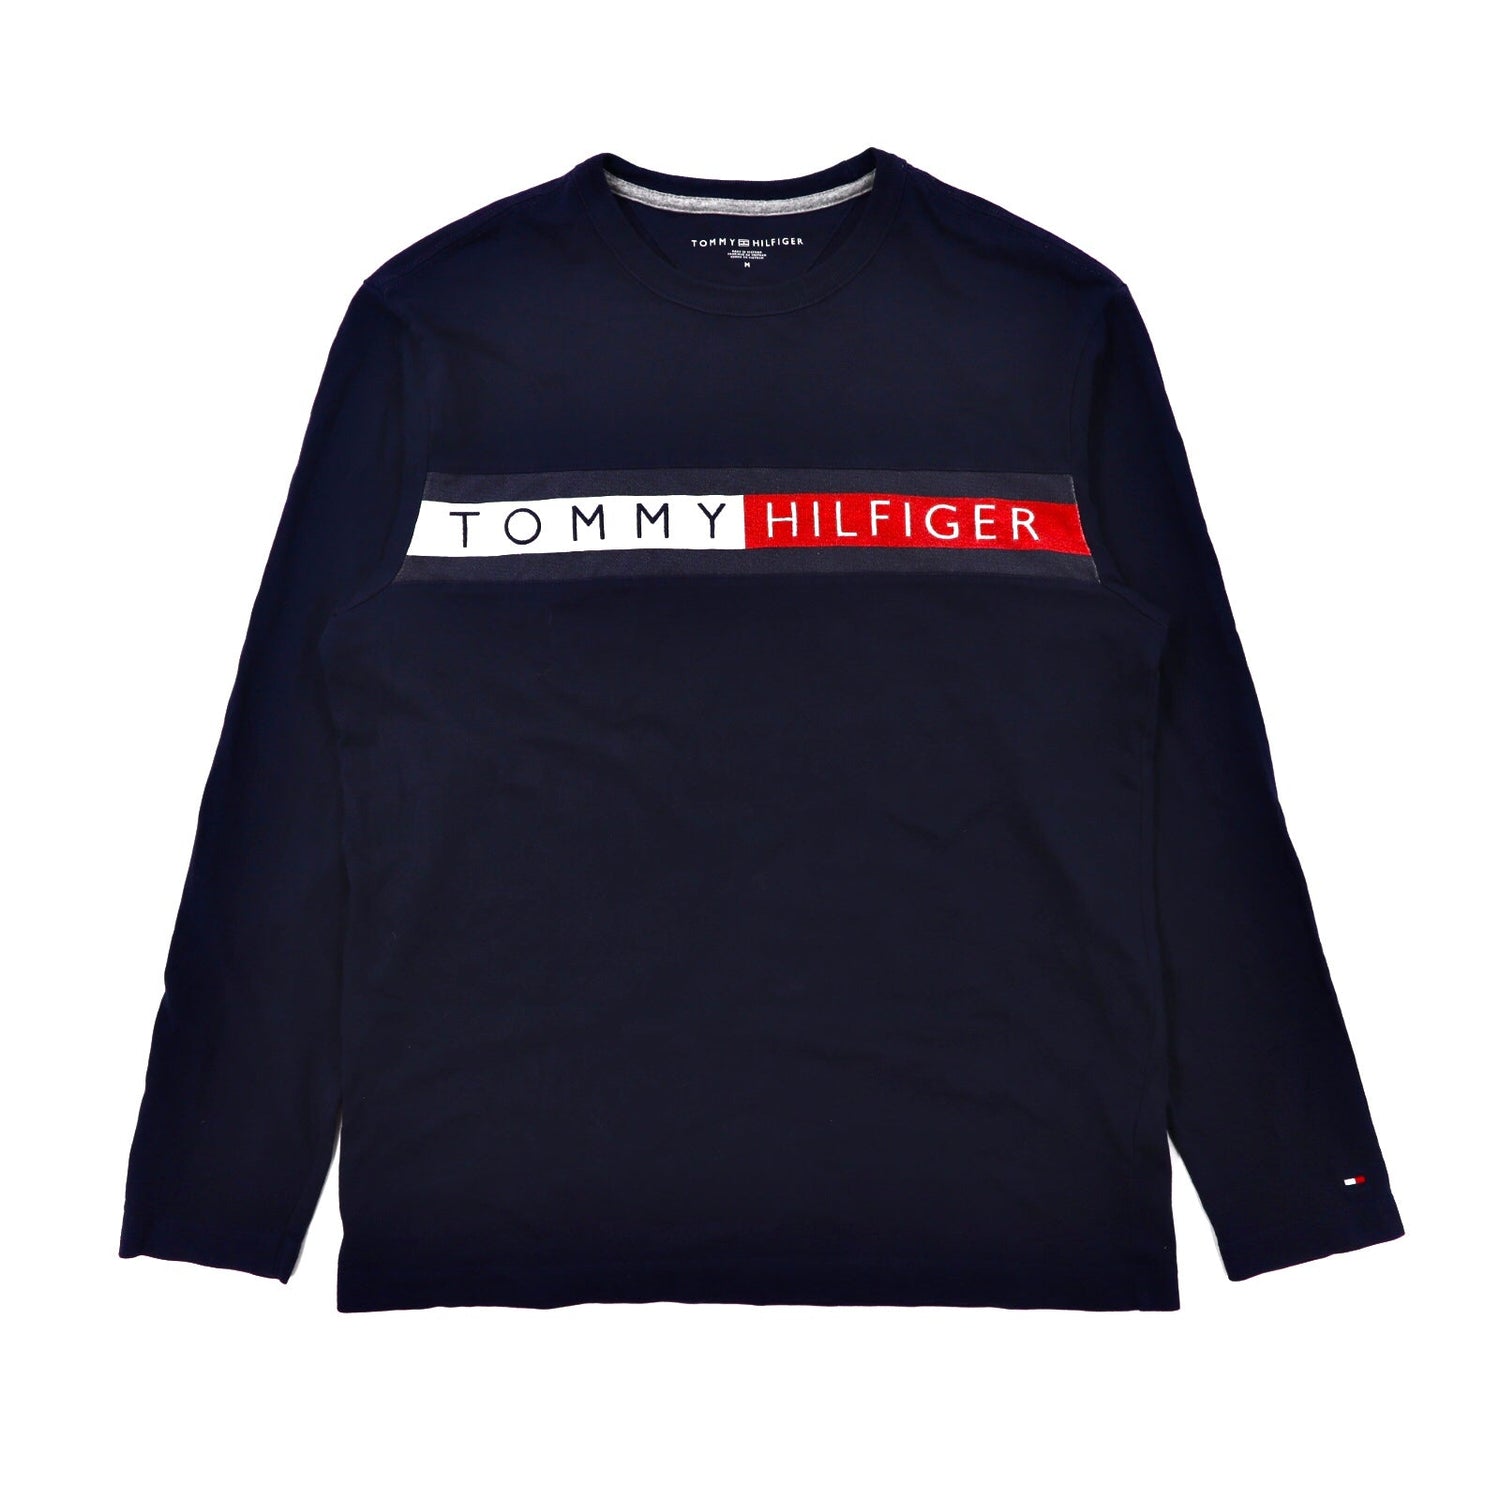 TOMMY HILFIGER Long Sleeve T -shirt M navy cotton logo embroidery